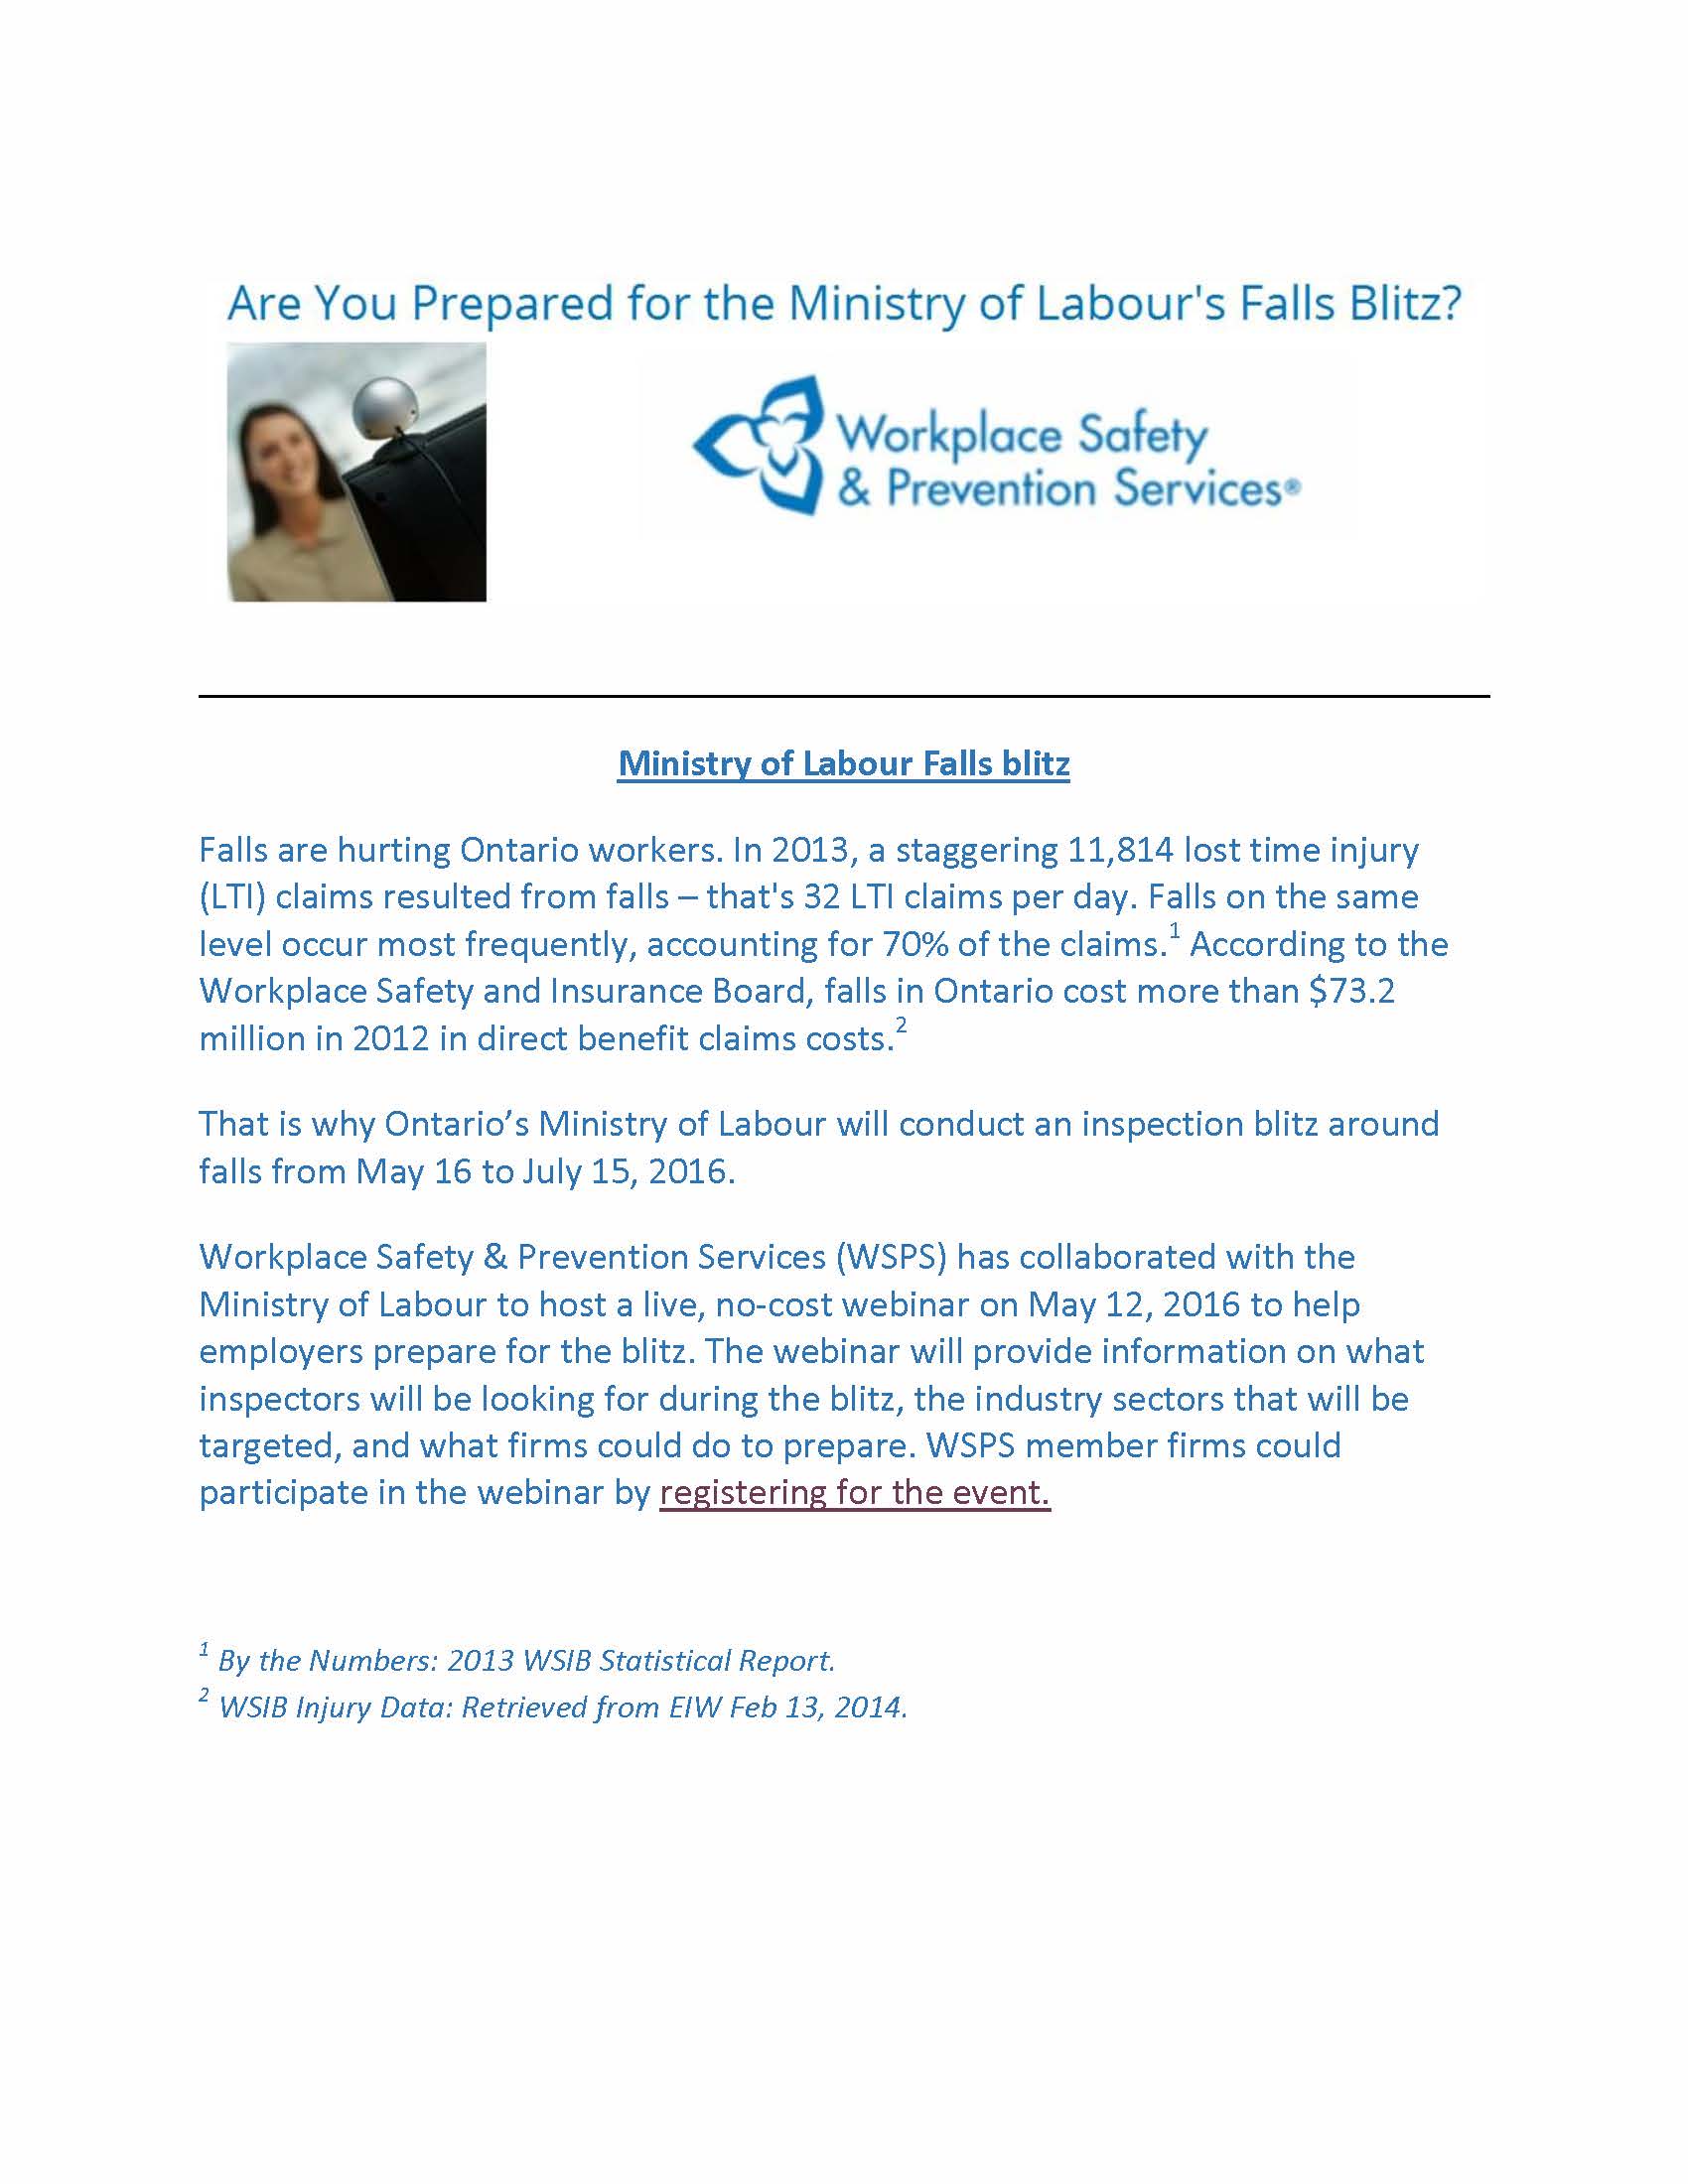 MINISTRY OF LABOUR'S FALLS BLITZ